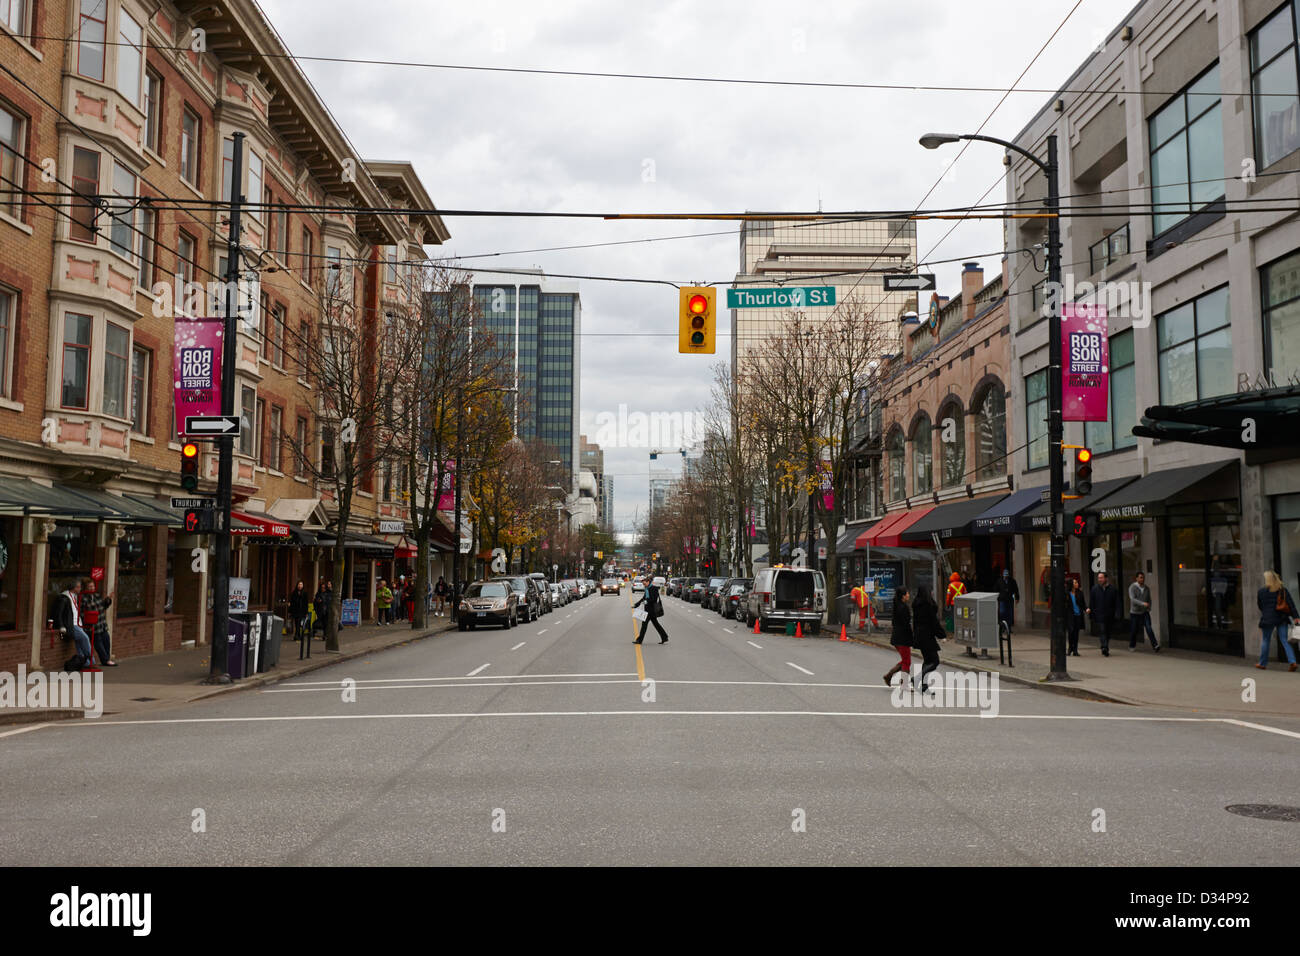 https://c8.alamy.com/comp/D34P92/looking-along-robson-street-shopping-area-from-thurlow-street-vancouver-D34P92.jpg